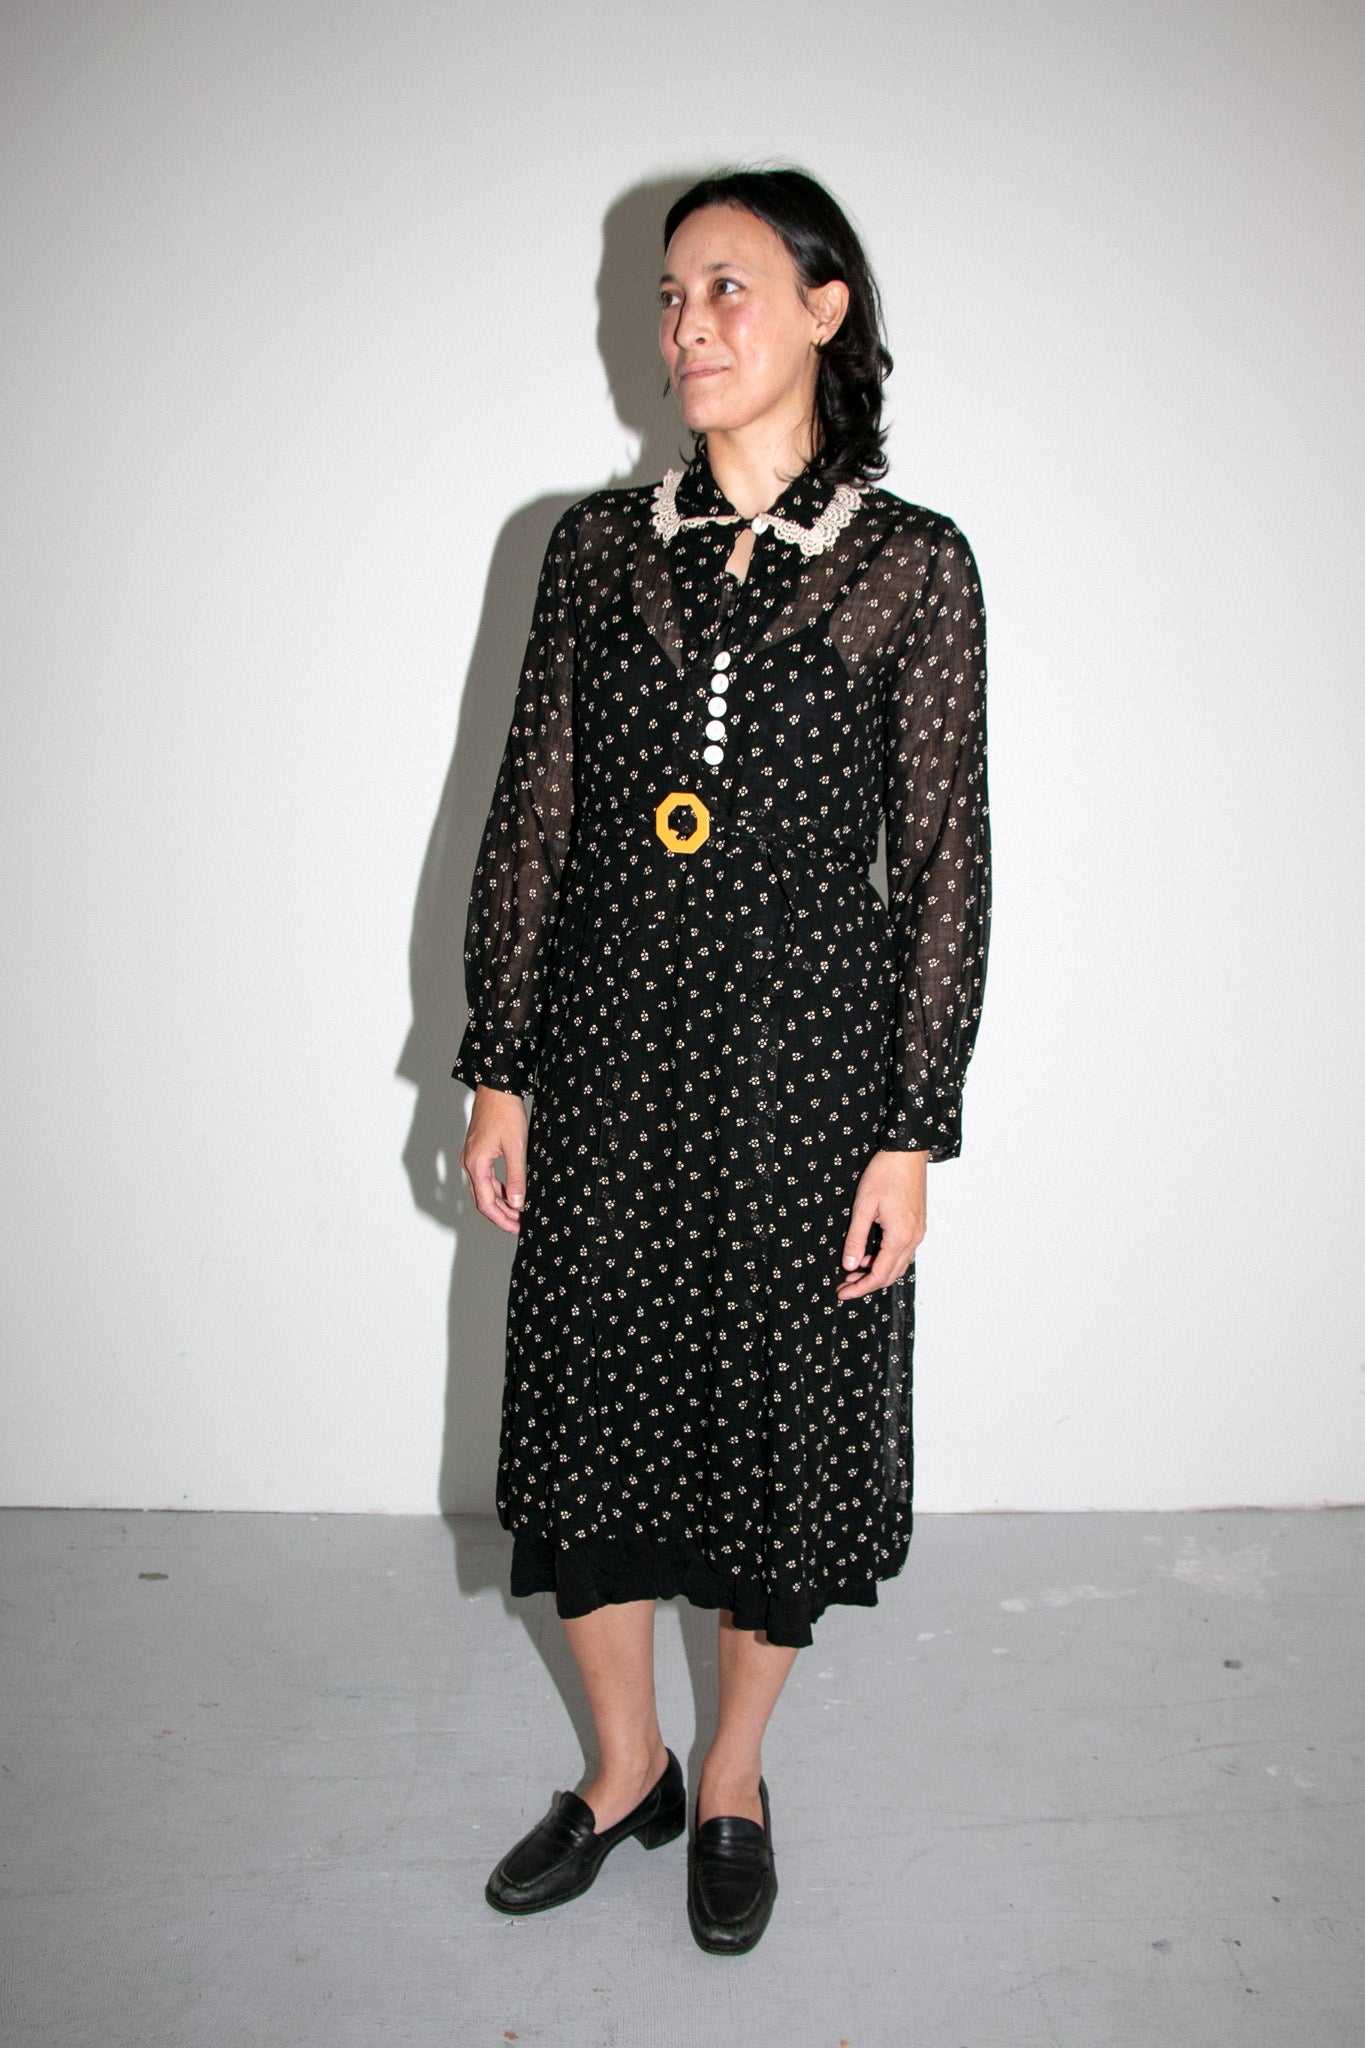 Vintage 1930's Black Long Sleeved Dress with Flecked Dots